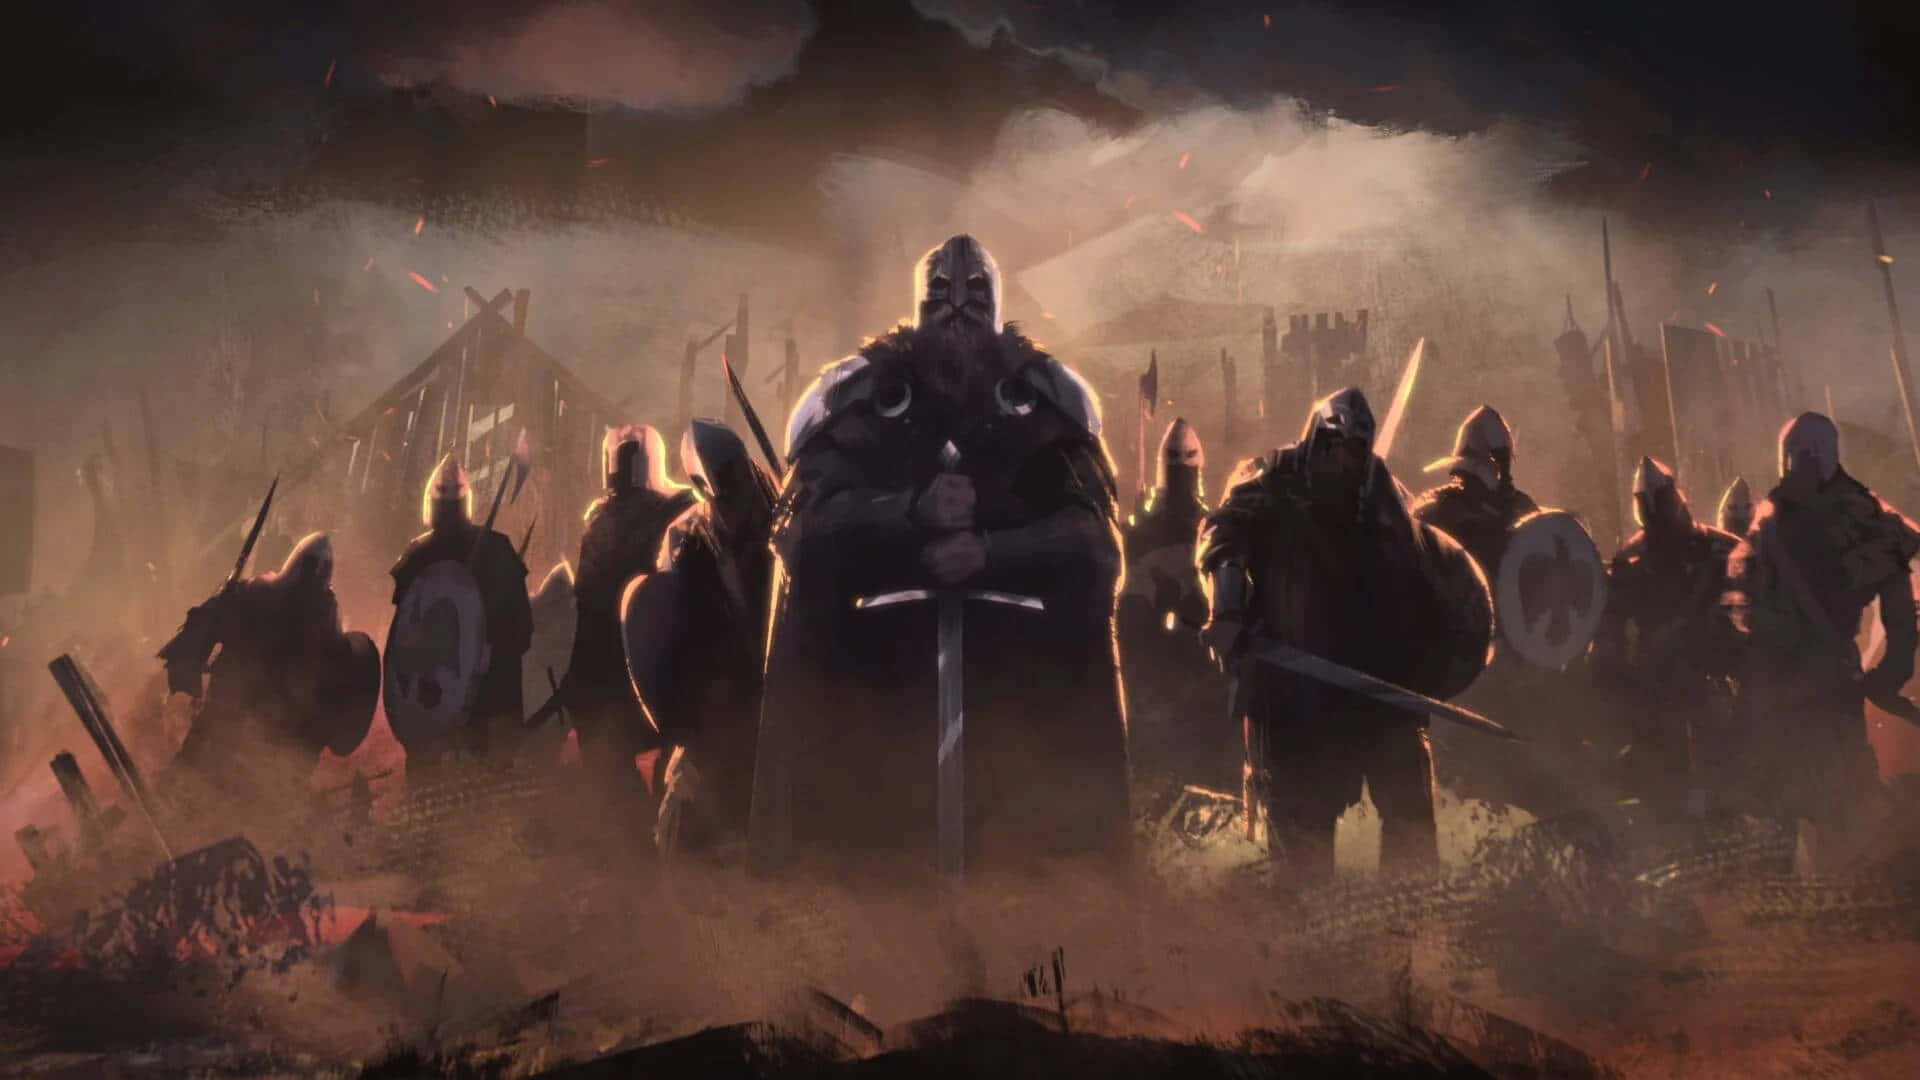 Best Total War Rome 2 Background Shadowy 1920 x 1080 Background